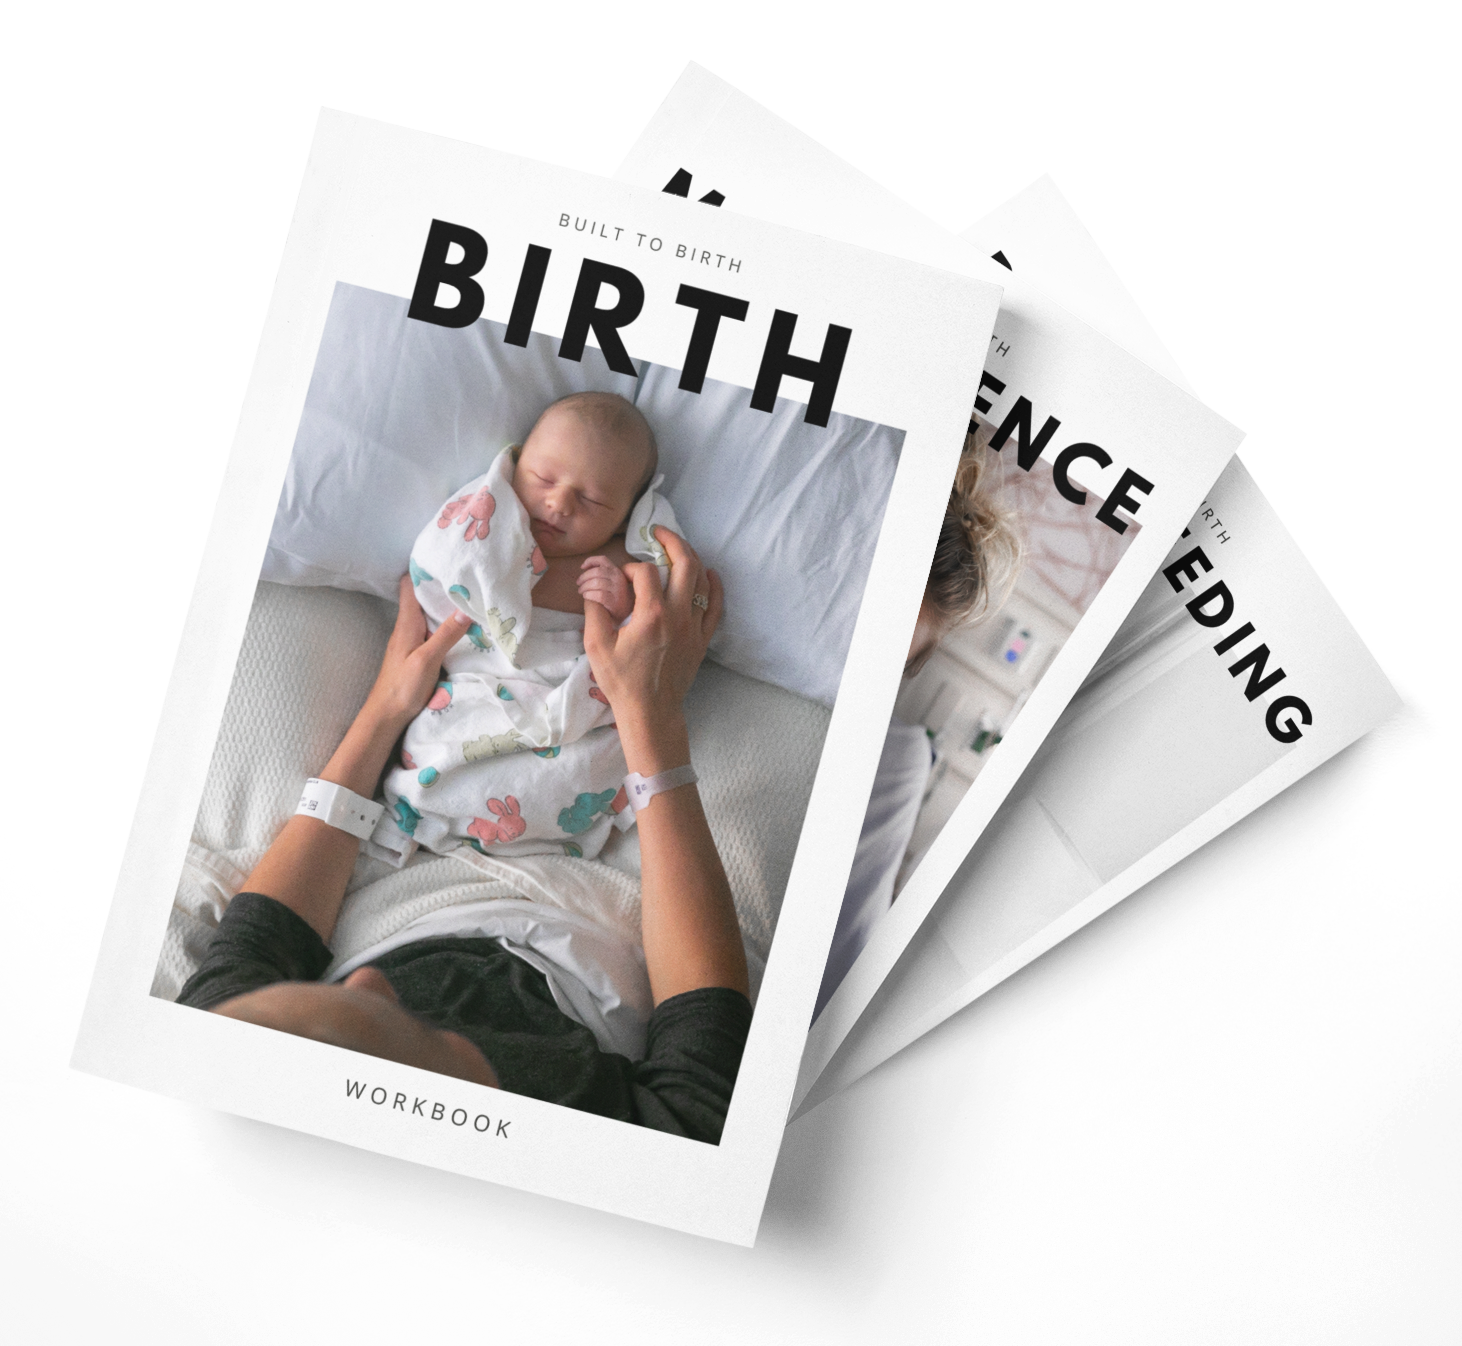 Birthing Classes: Everything You Ever Wanted to Know